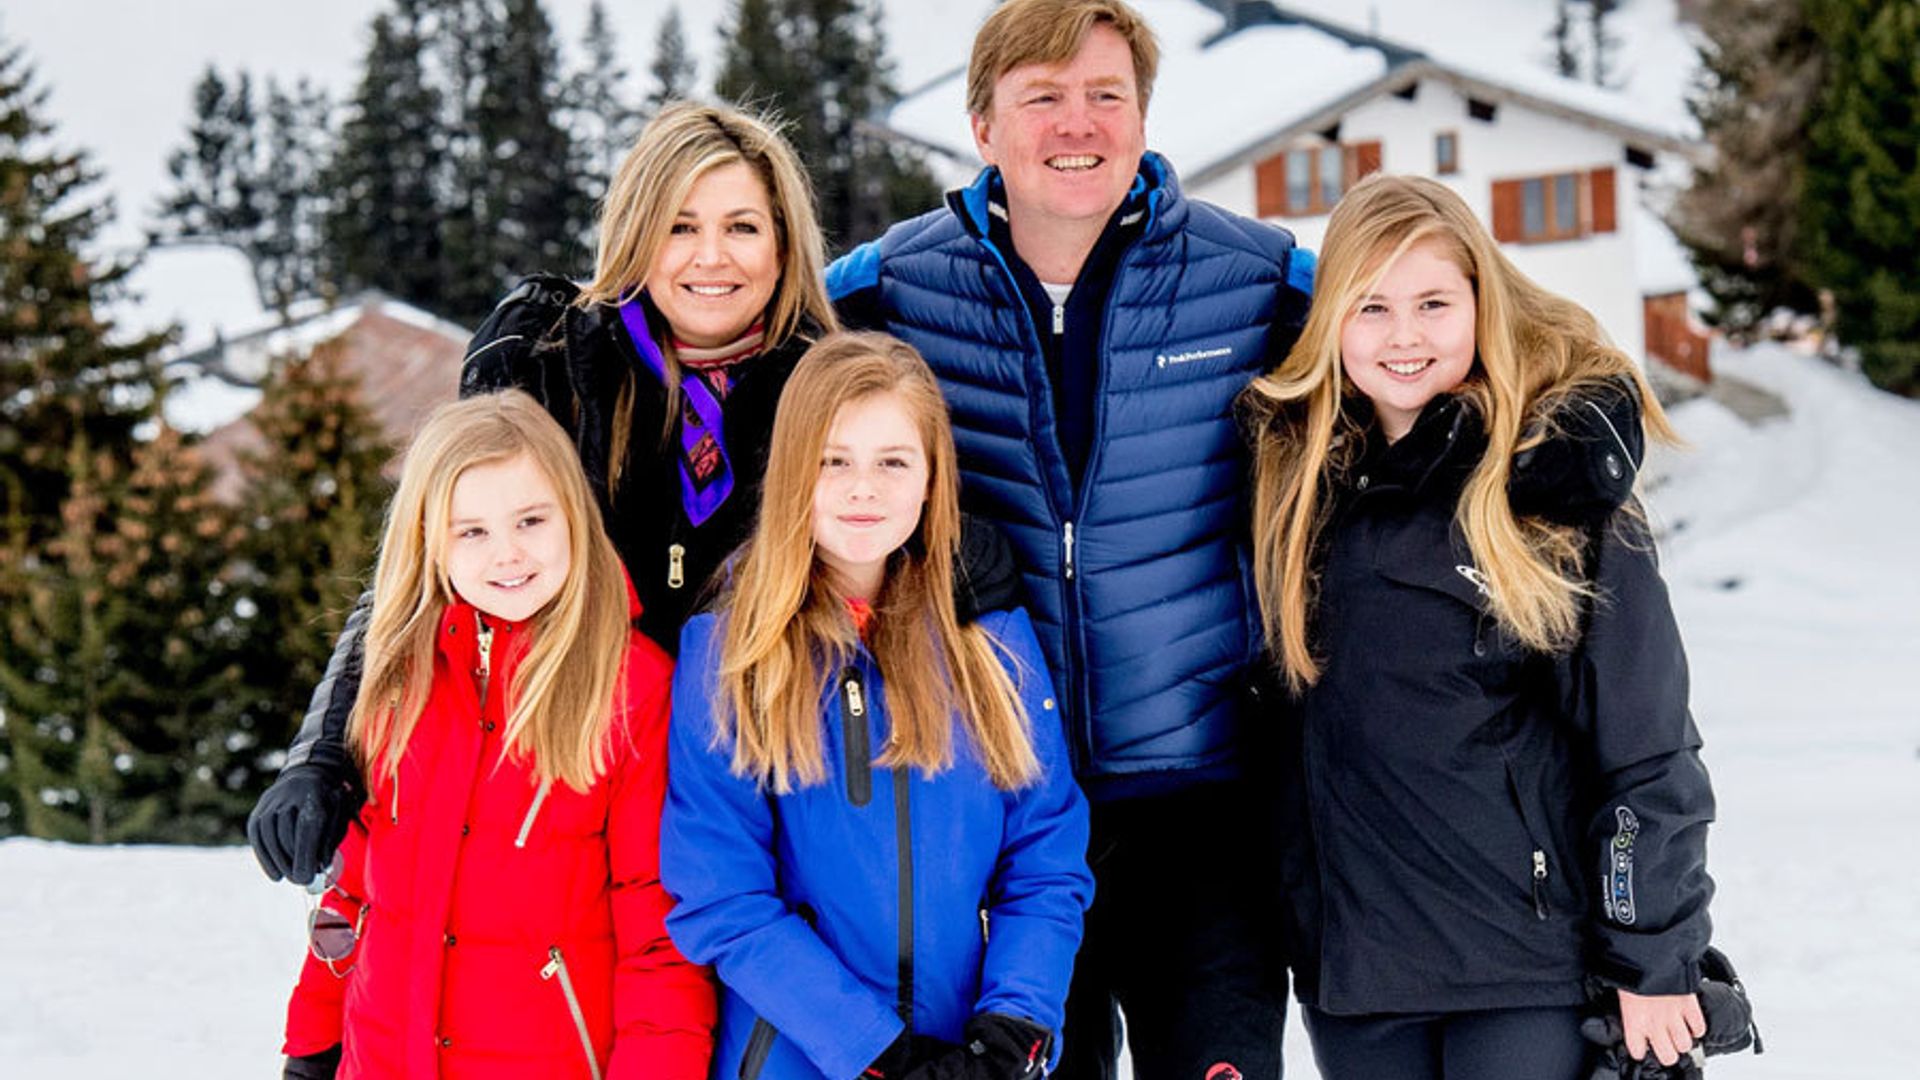 Princess Alexia hits the slopes a year after ski accident